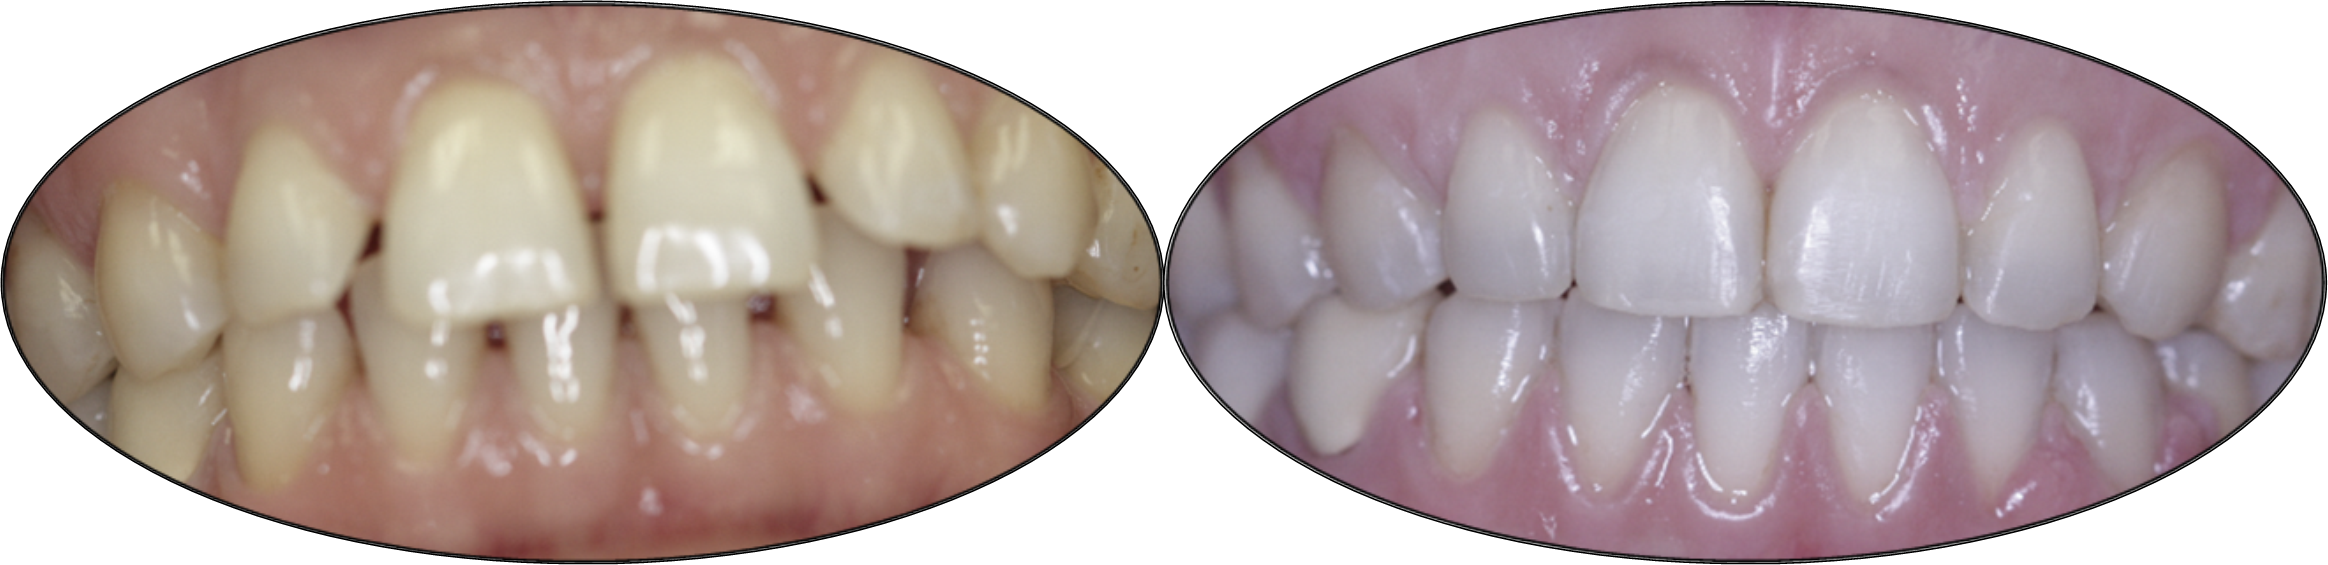 Smile gallery images, before and after orthodontics, patient four